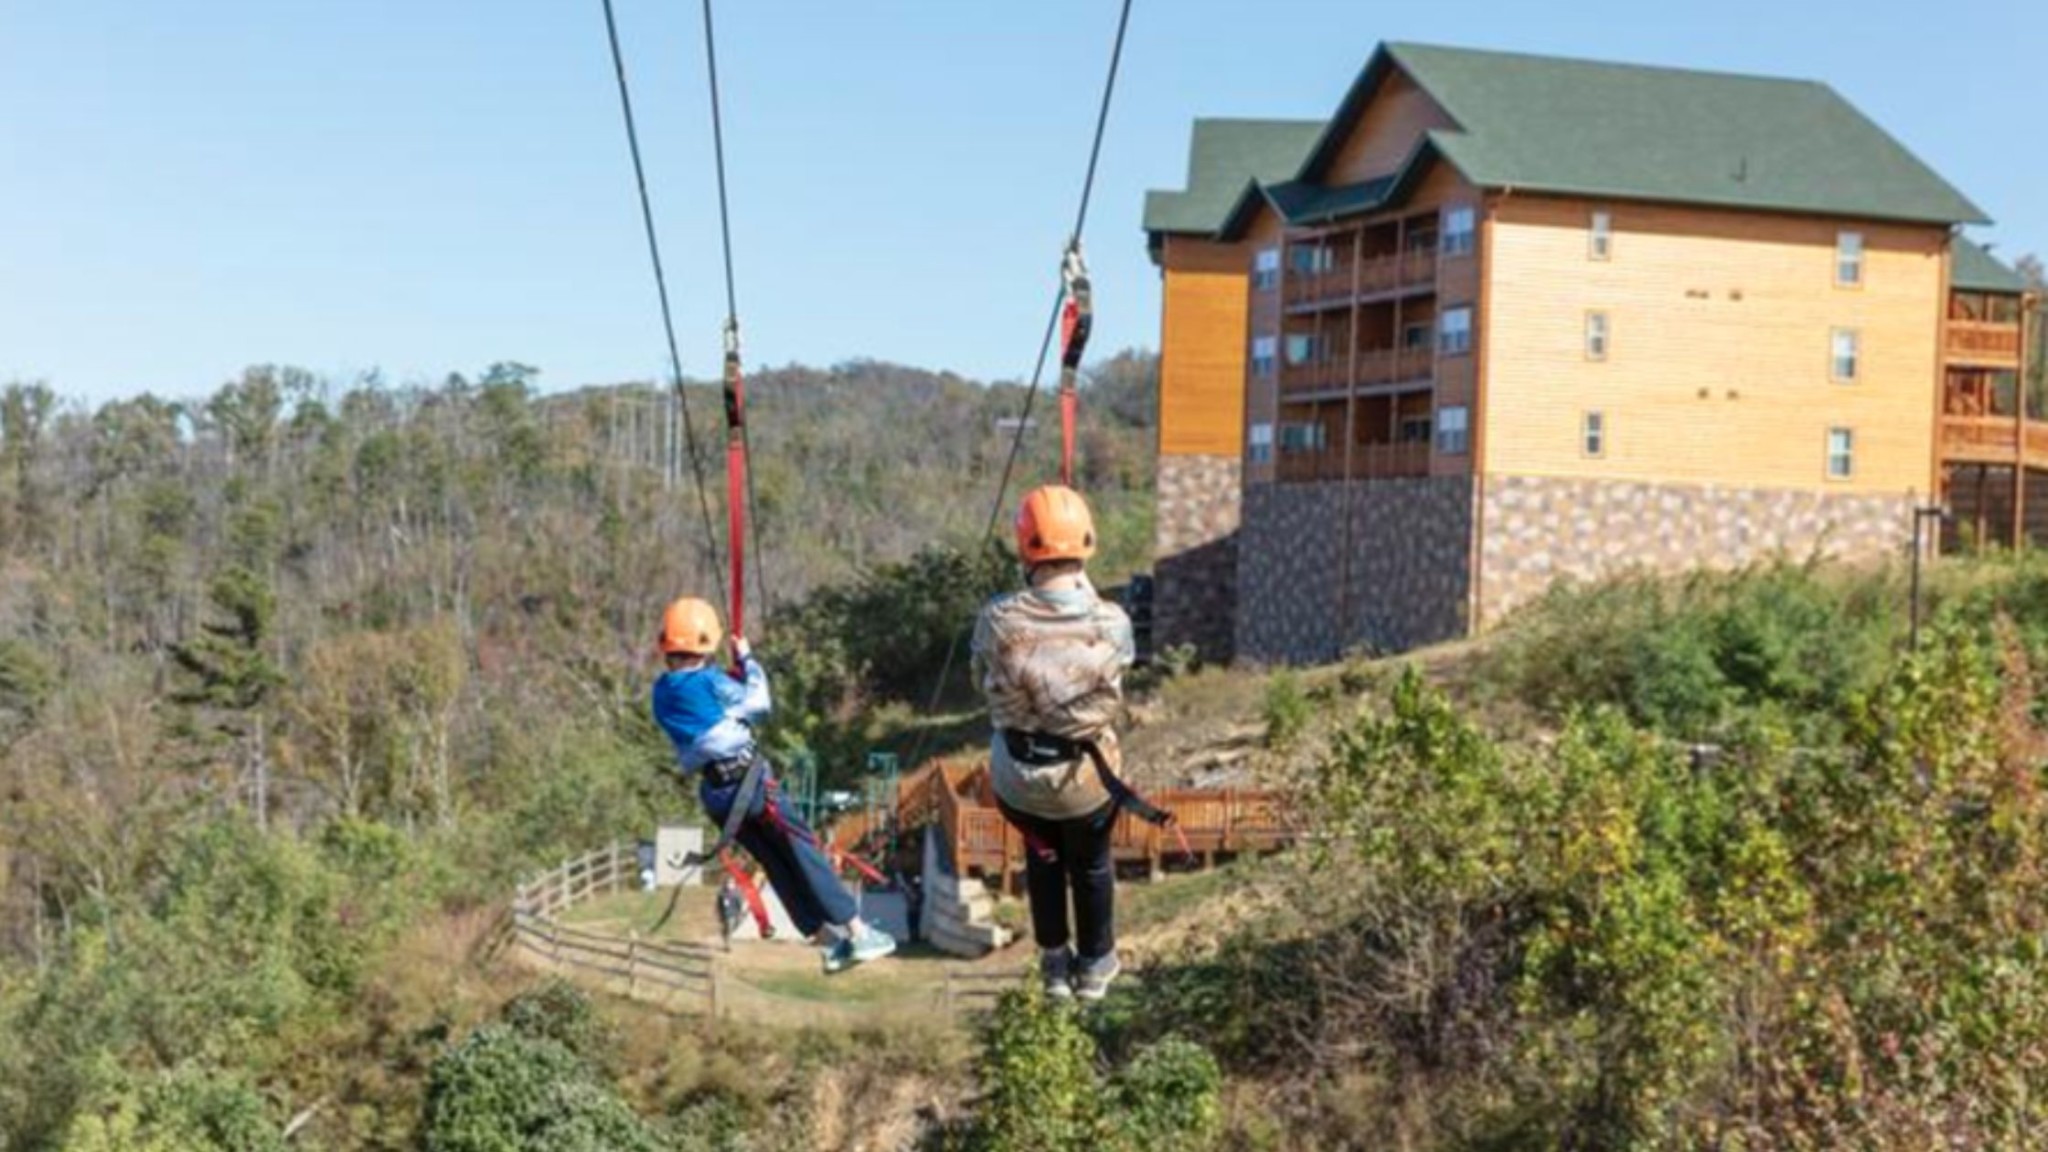 male and female, ziplining in the smoky mountains, gatlinburg tn